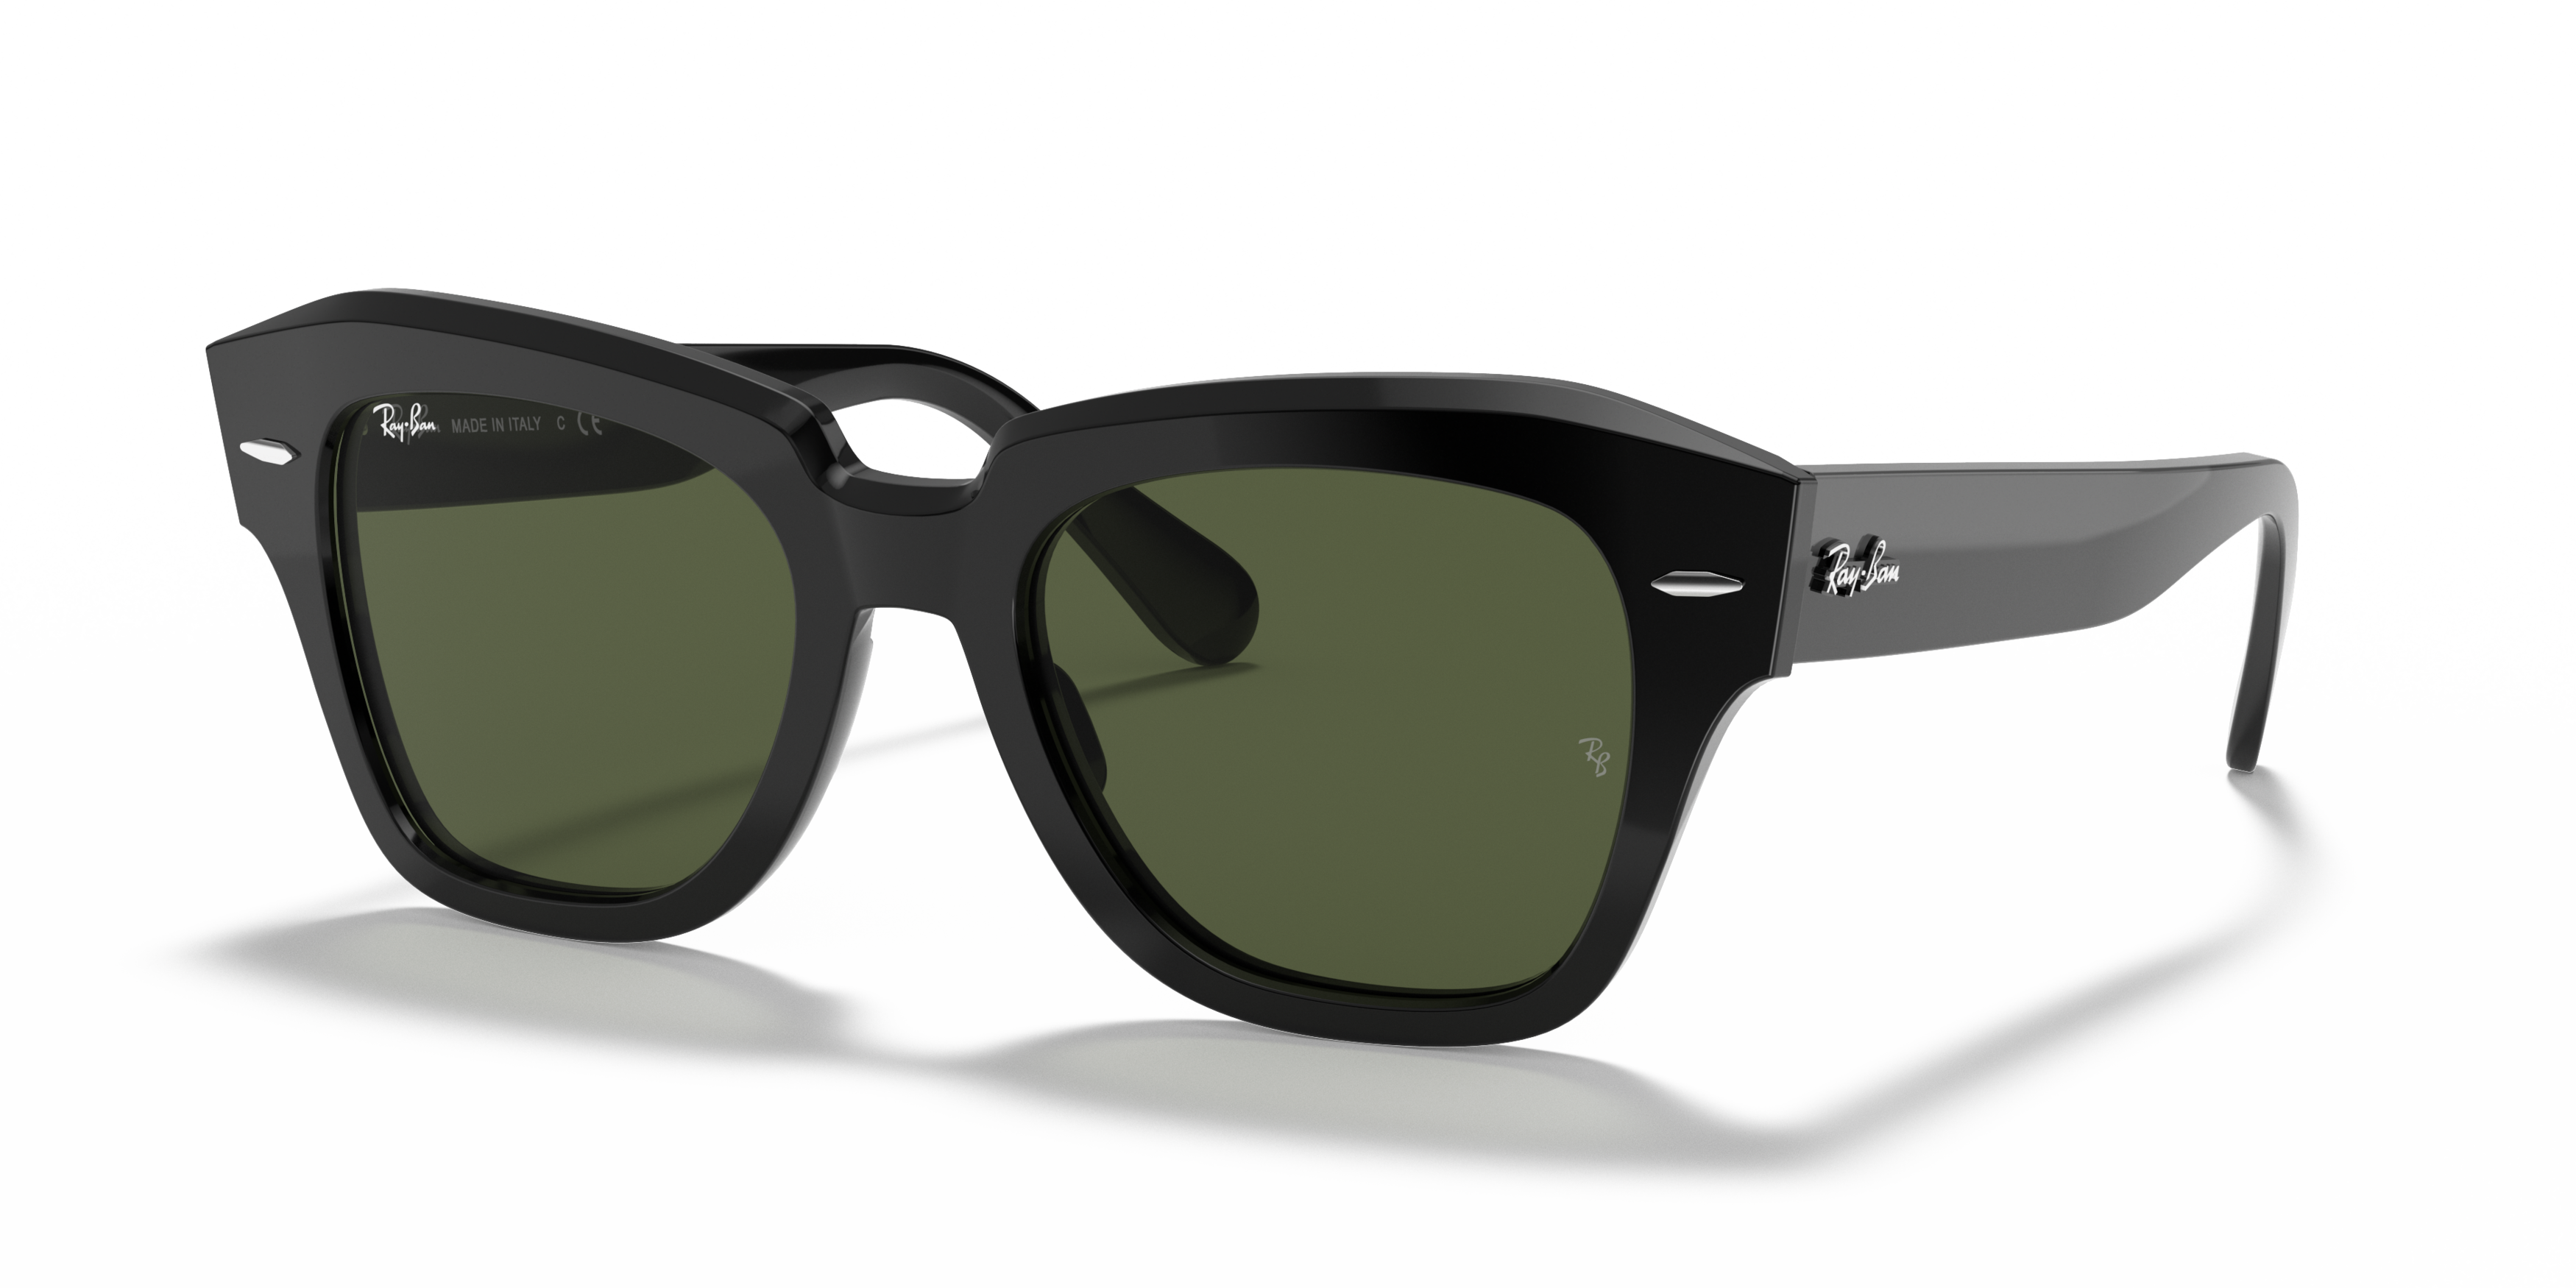 Angle_Left01 Ray-Ban State Street RB 2186 901/31 49 Verde / Preto